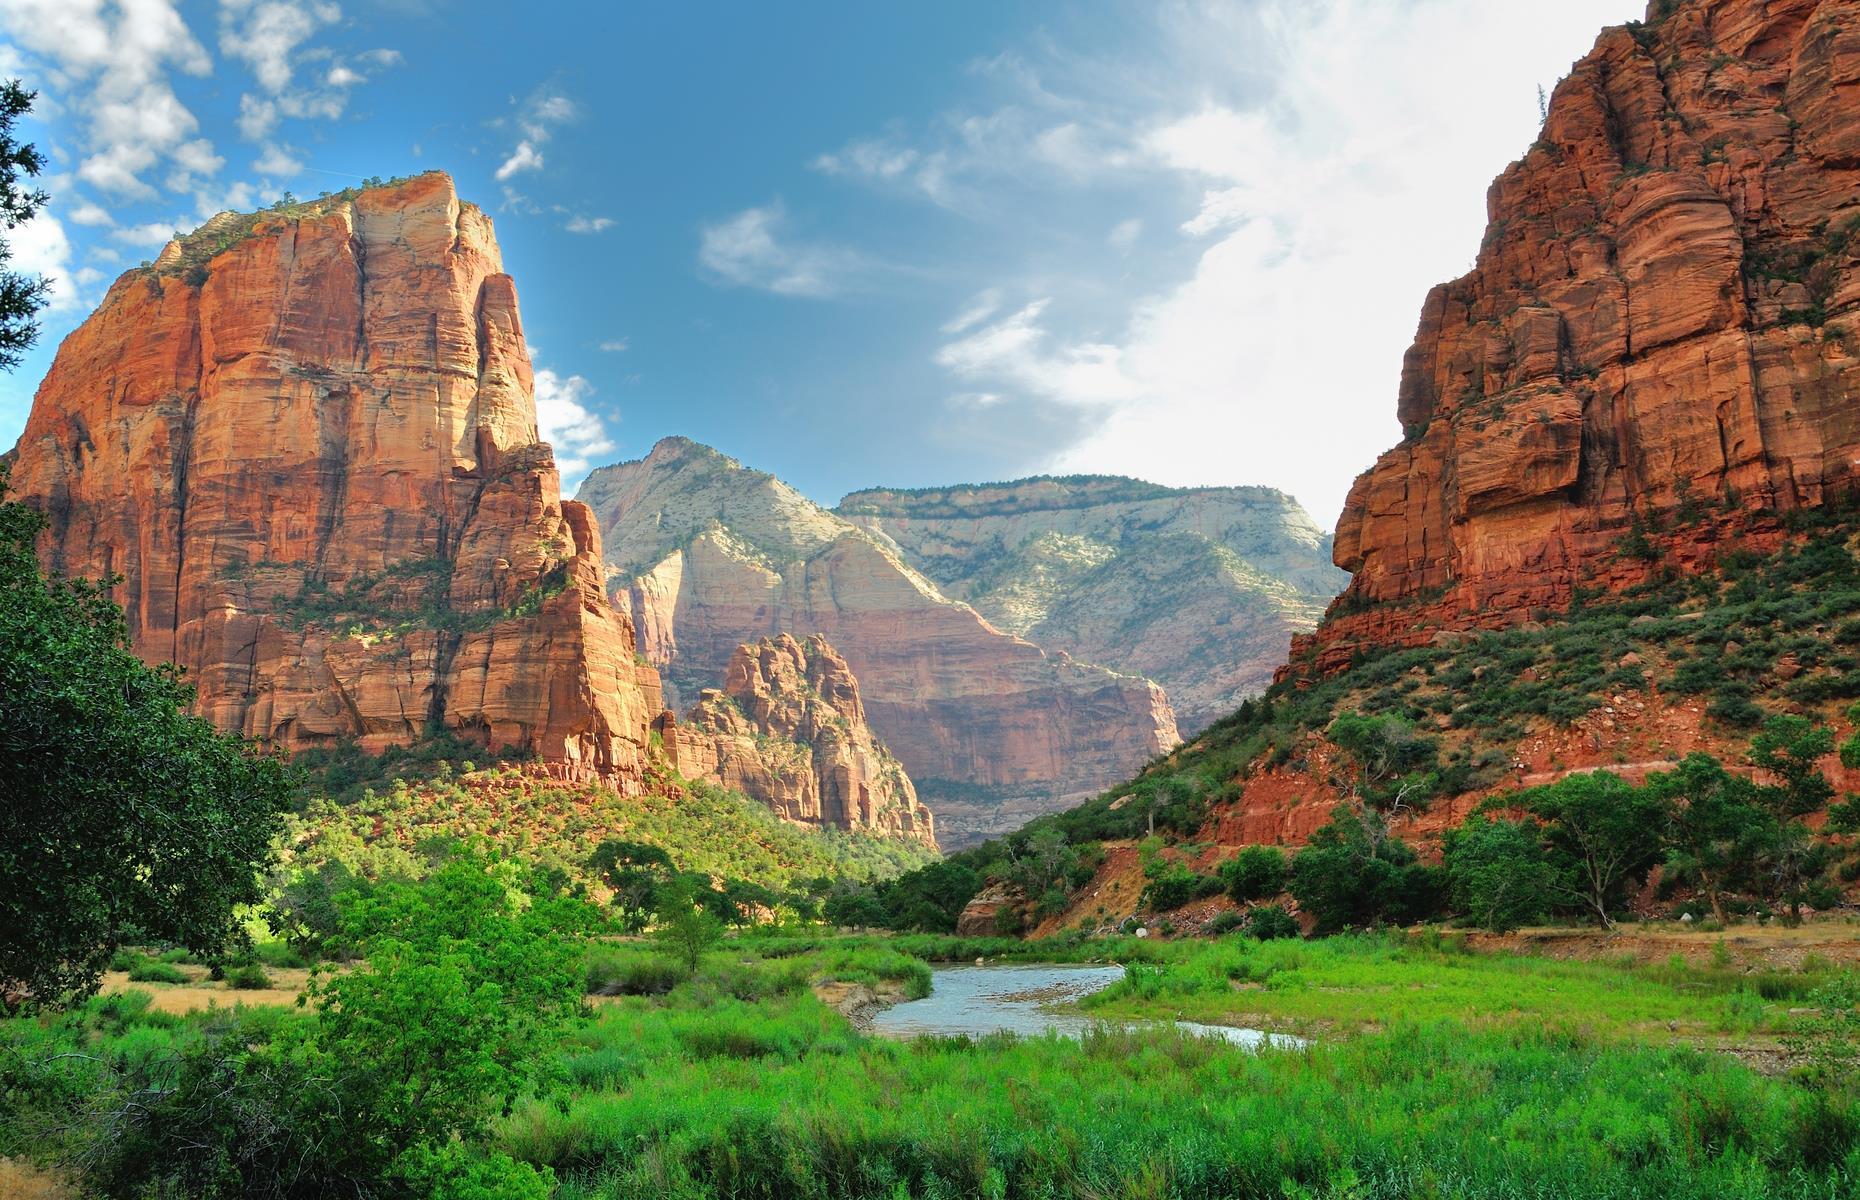 <p>Utah has no shortage of spectacular national parks, but this land of slot canyons and sun-baked sandstone cliffs remains the most mesmerizing. <a href="https://www.nps.gov/zion/index.htm">Zion National Park</a> was established in 1919, though its history stretches back much further – it's thought that humans inhabited this park as early as 6,000 BC. Today, visitors come here to walk, bike, canoe and canyon, with hikes ranging from easy to arduous lacing the popular Zion Canyon area.</p>